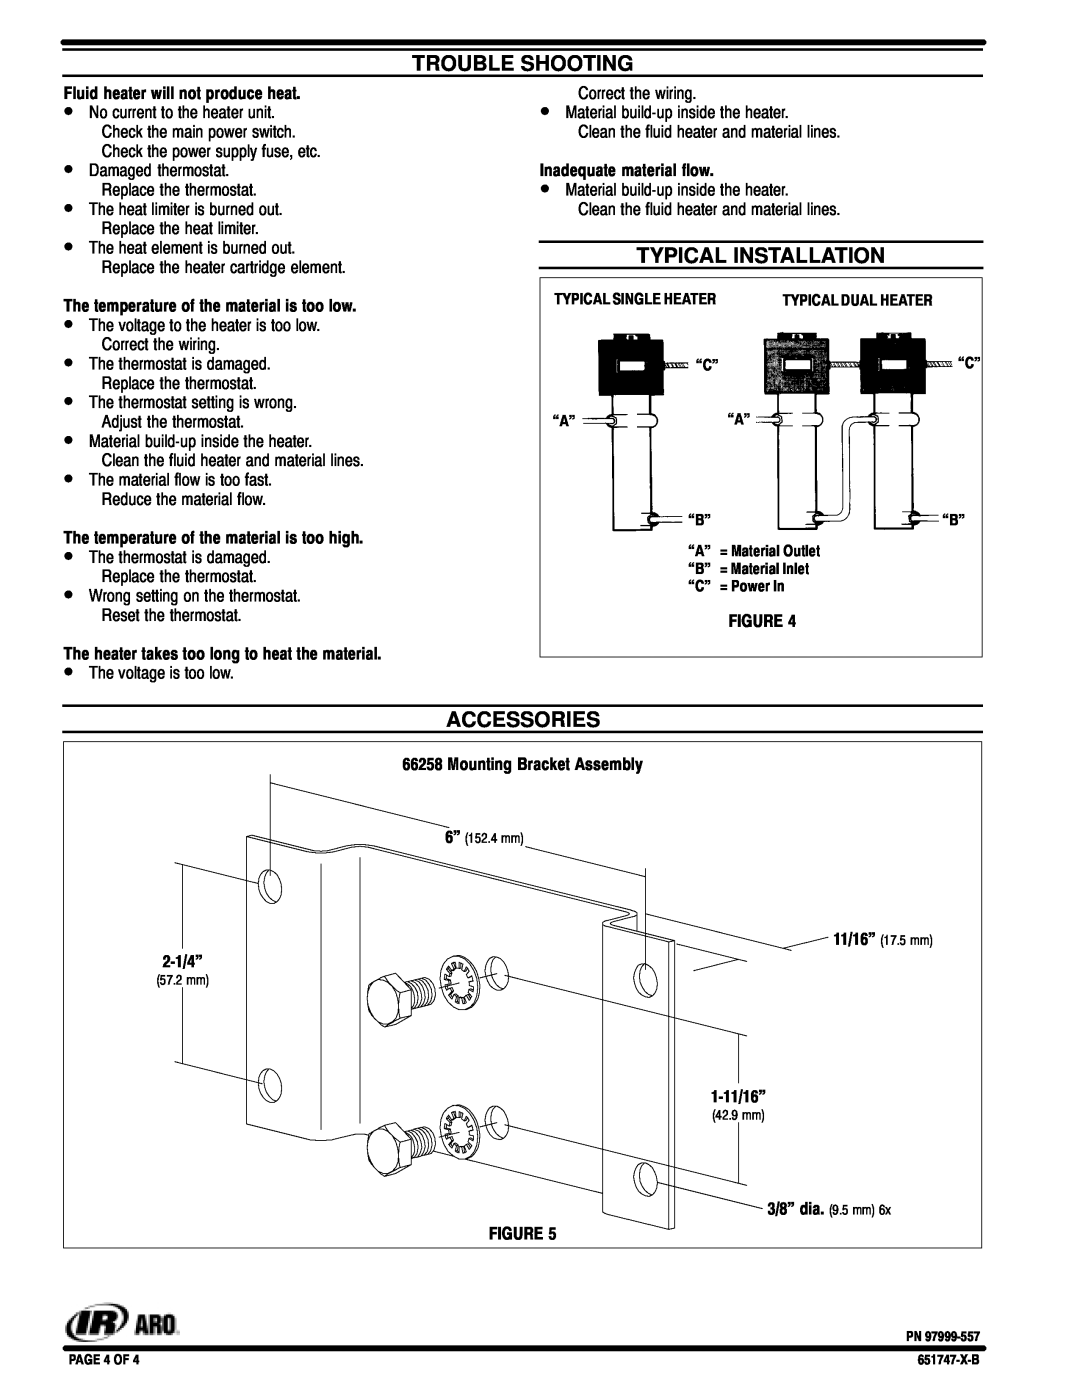 Ingersoll-Rand 651747-X-B manual Trouble Shooting, Accessories, Typical Installation 